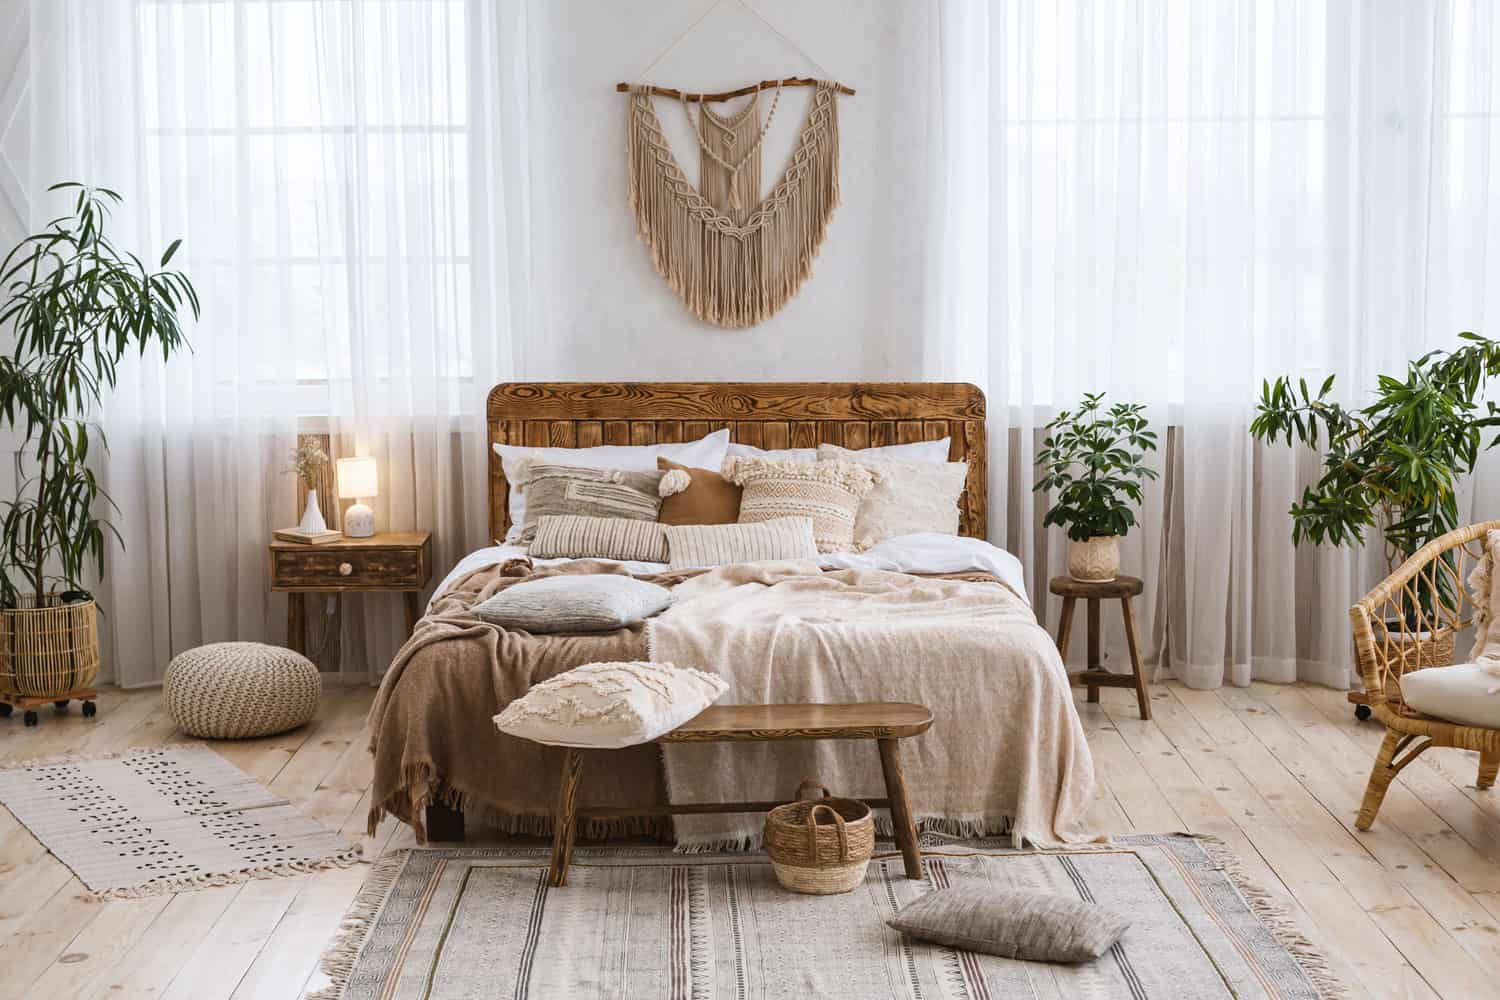 Modern interior of a bohemian themed bedroom with macramé accessories and wooden flooring